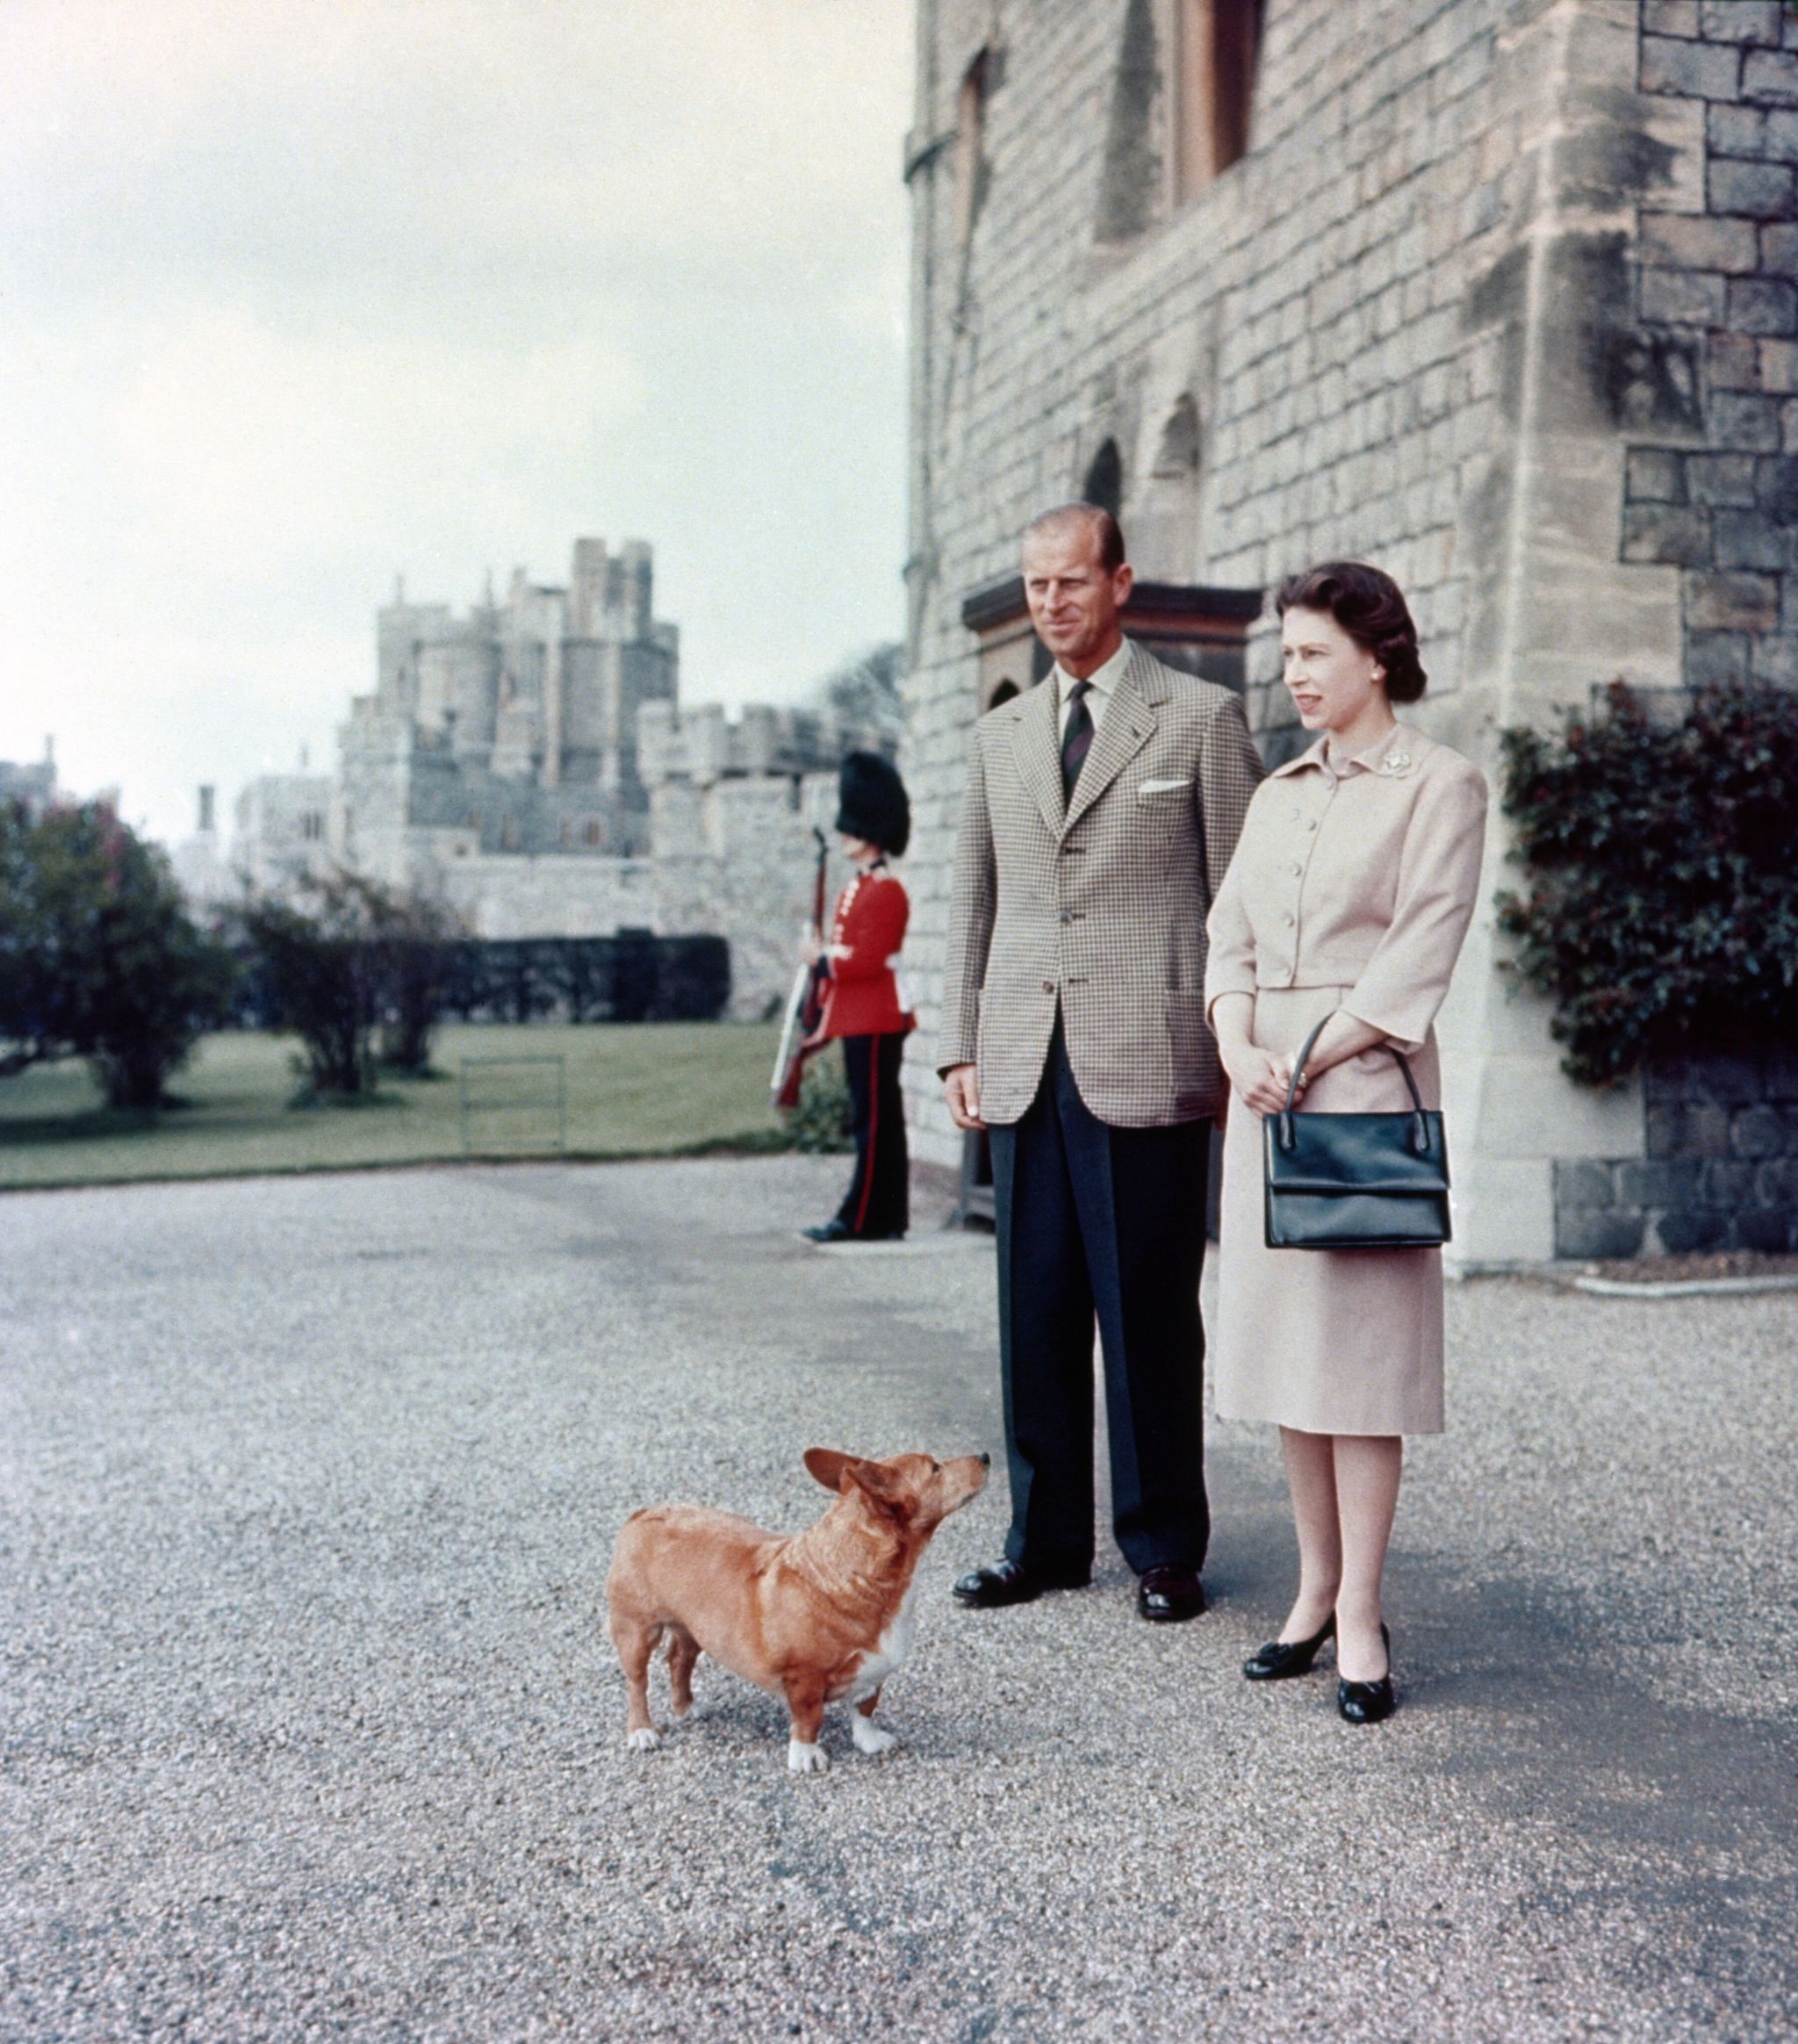 Prince Philip and the Queen with one of their dogs